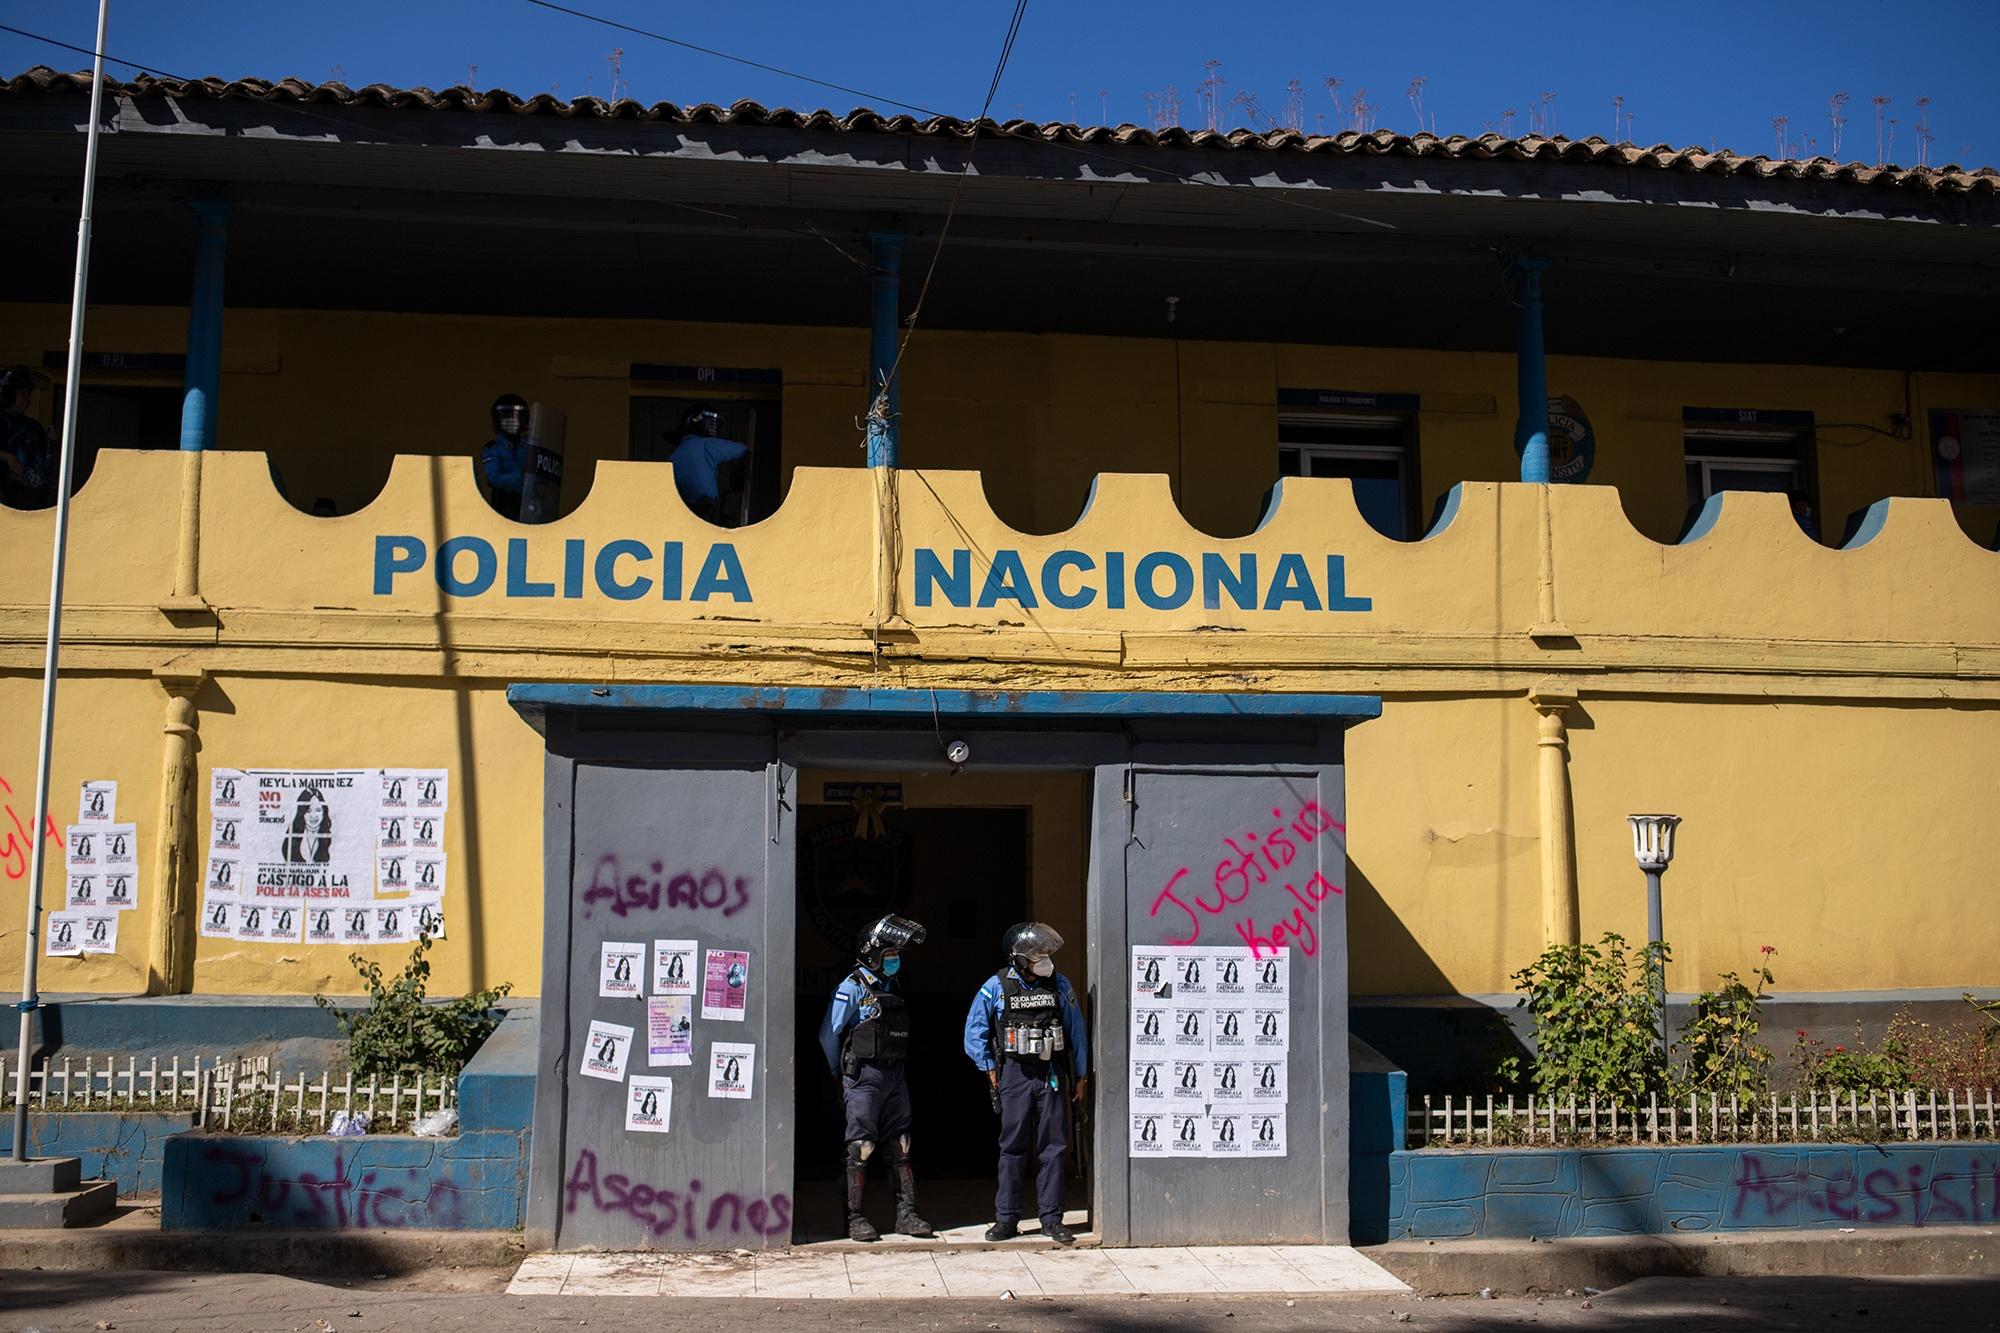 Two PNH agents guard the entrance to the Intibucá police station during the stand-off with protesters. La Esperanza, Intibucá. February 8, 2021. Photo: Martín Cálix/Contracorriente